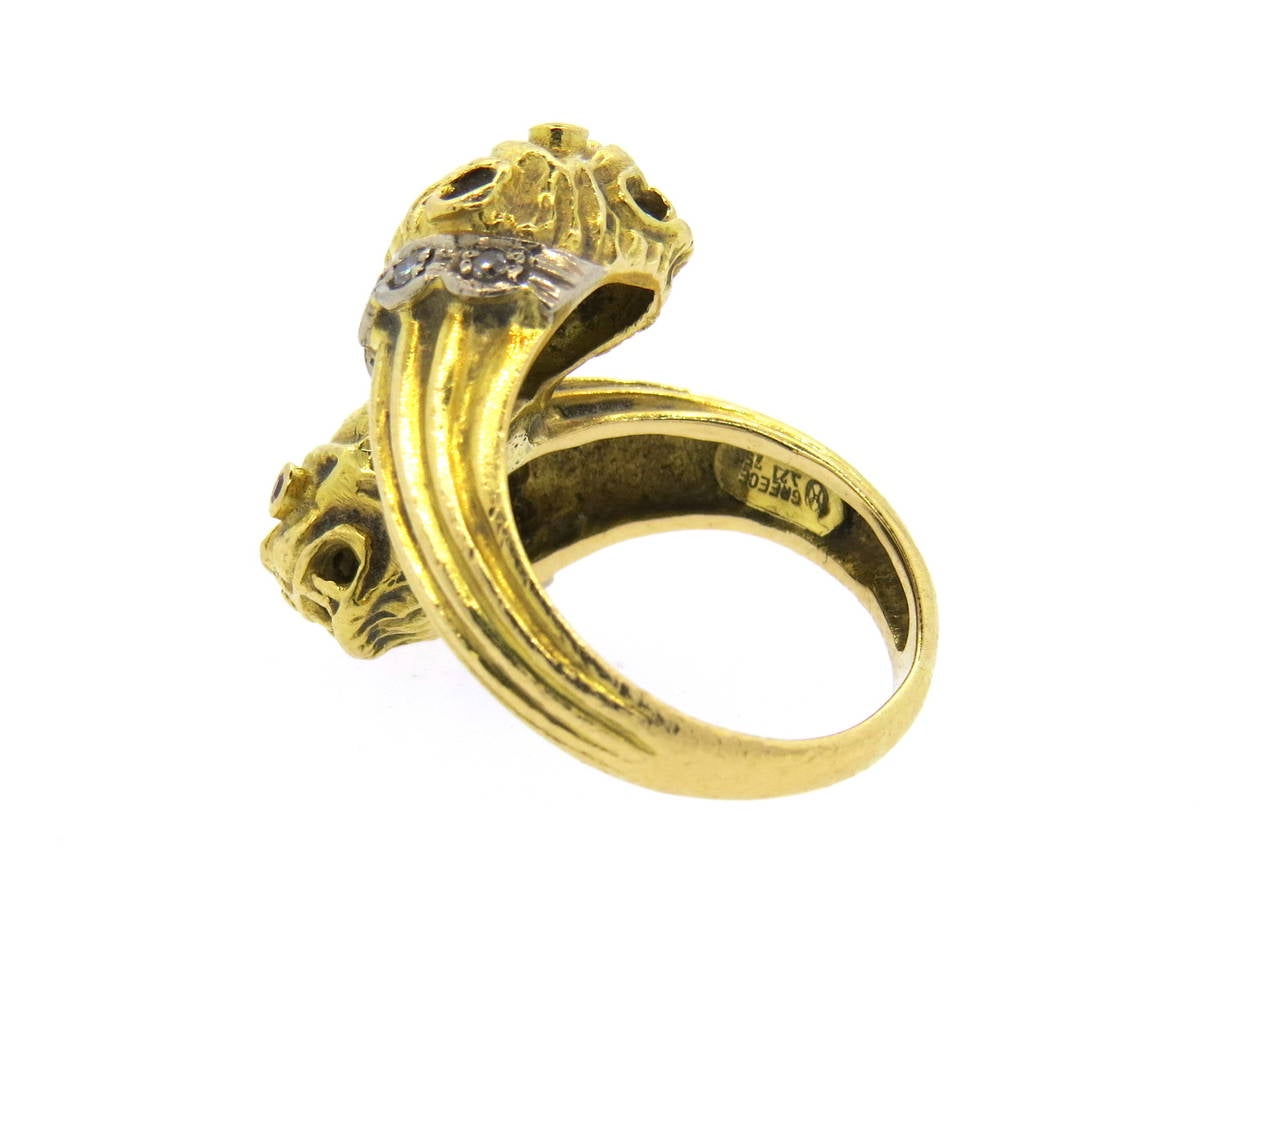 18k gold bypass ring, crafted by Ilias Lalaounis, set with diamonds and ruby eyes. Ring is a size 7, ring top is 23mm wide. Marked Greece, Makers mark and 750. Weight of the piece - 13.8 grams